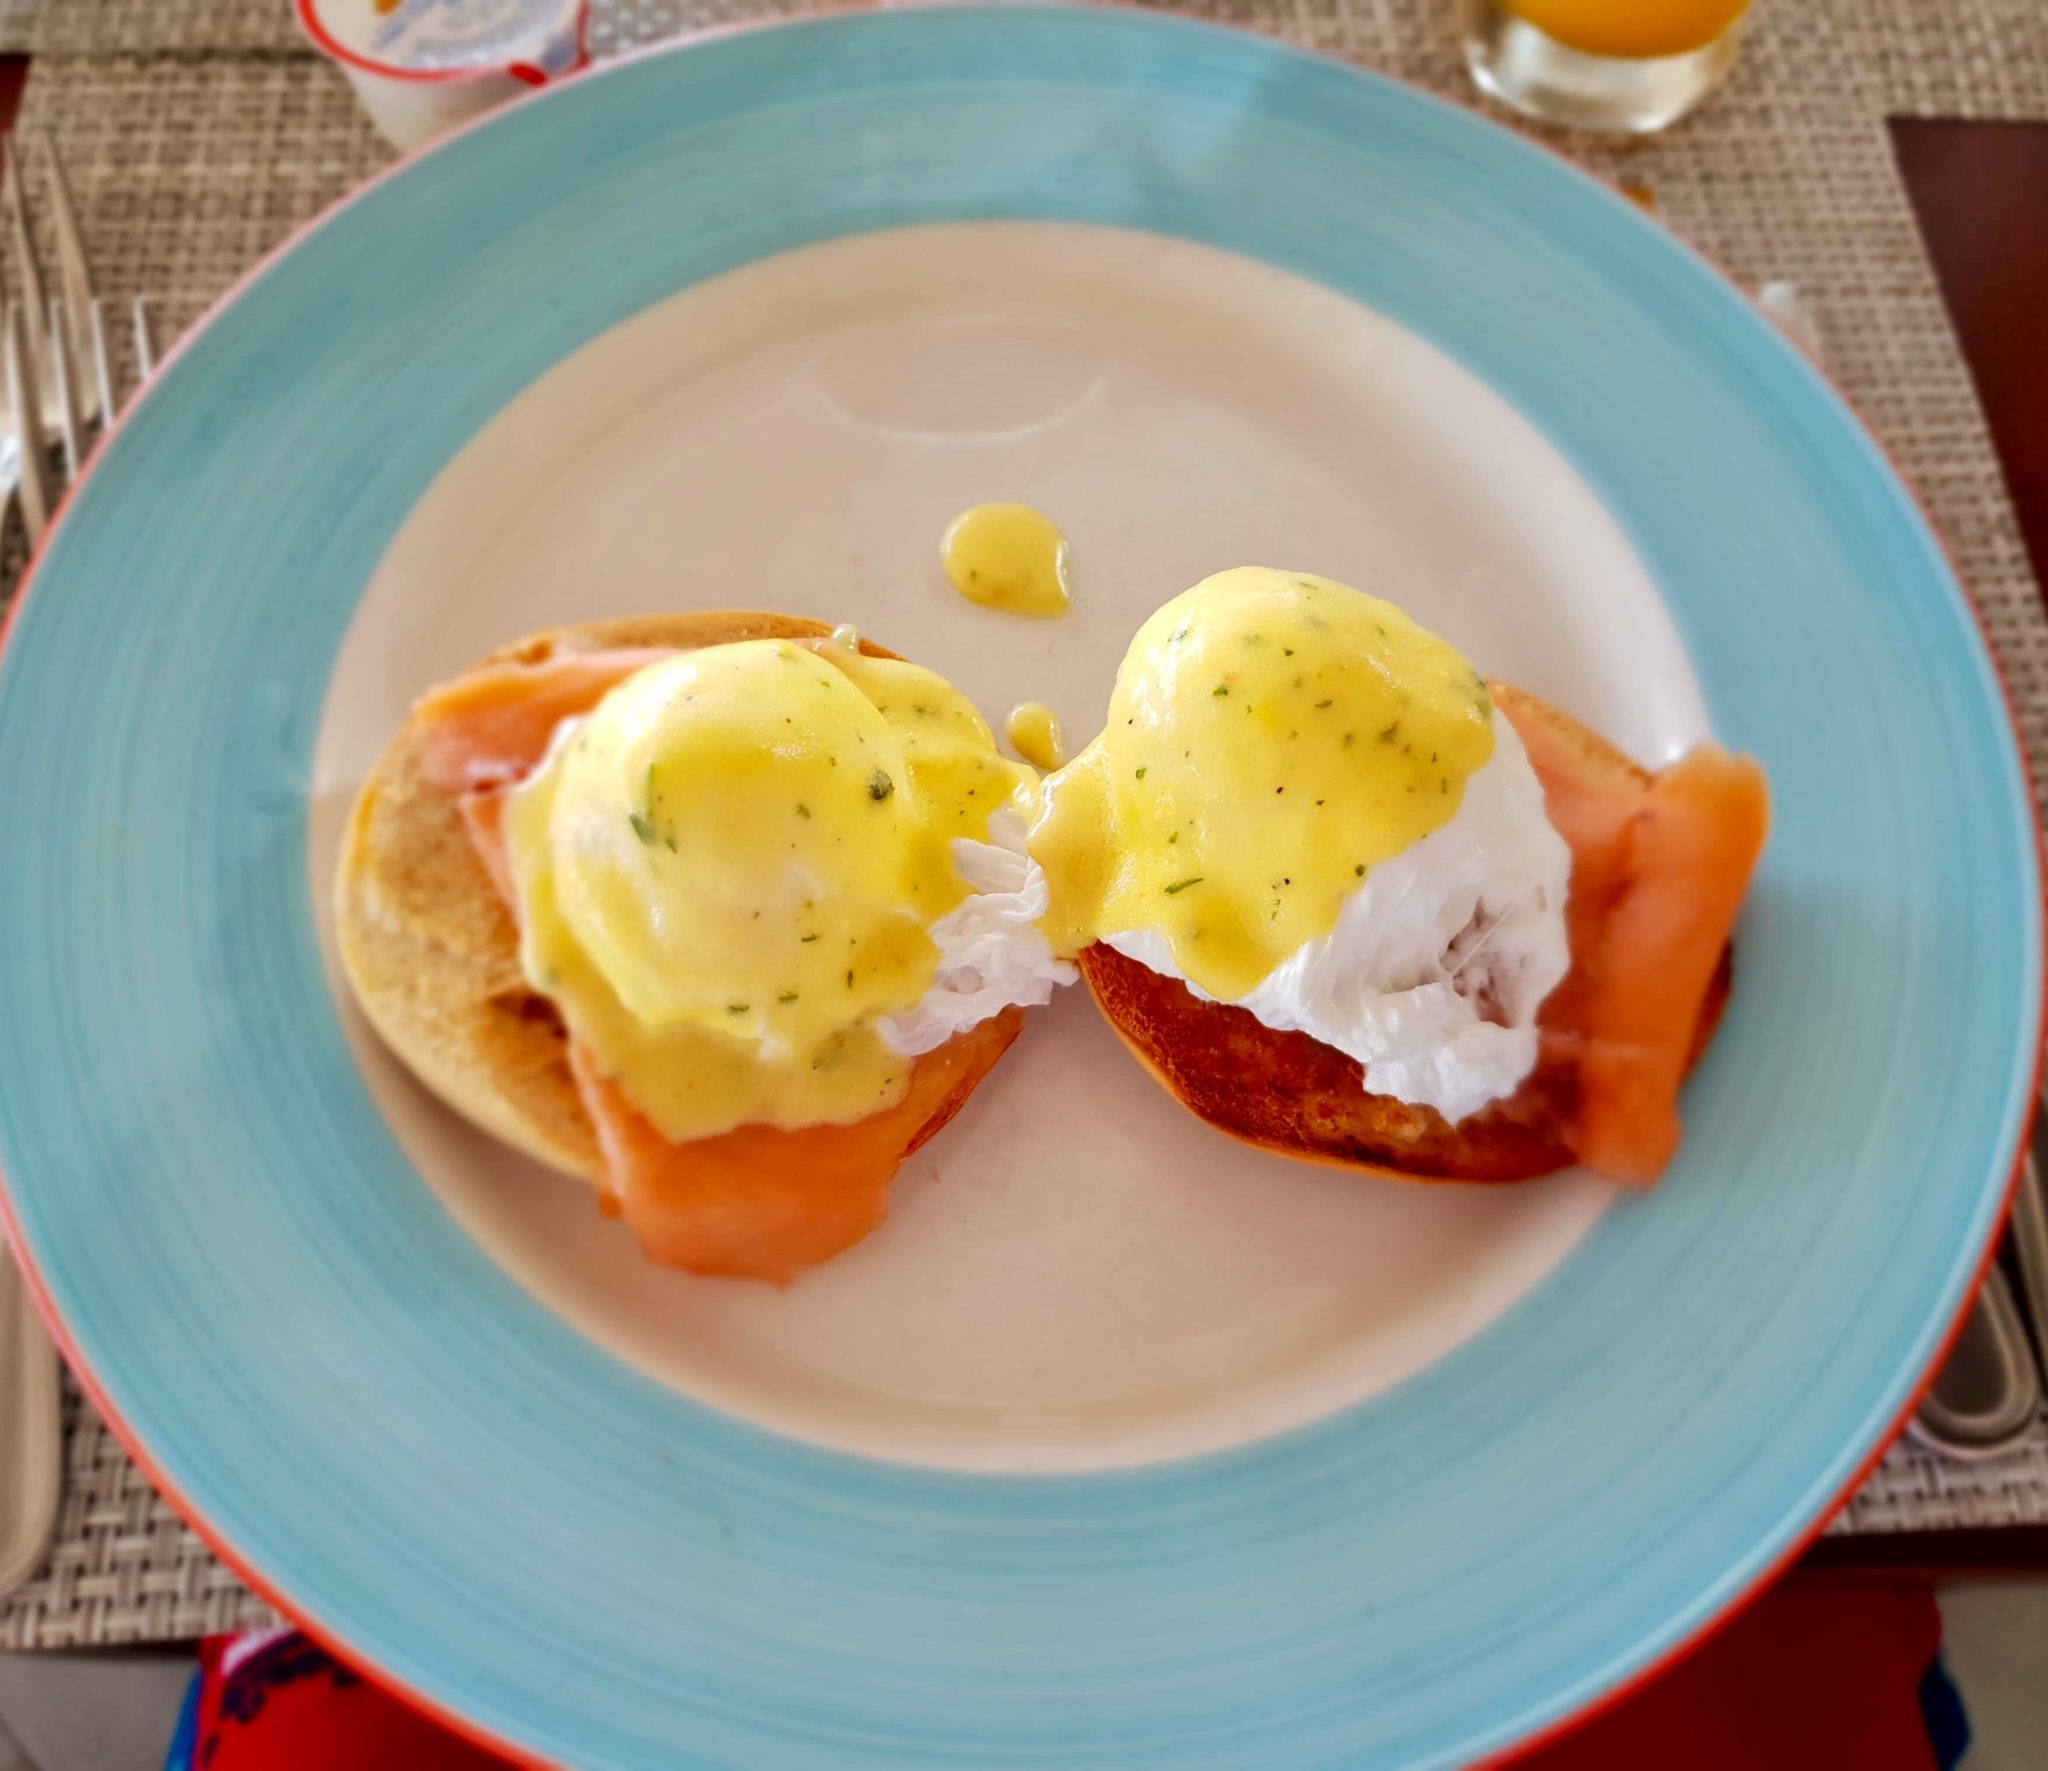 eggs royale on a blue rimmed plate